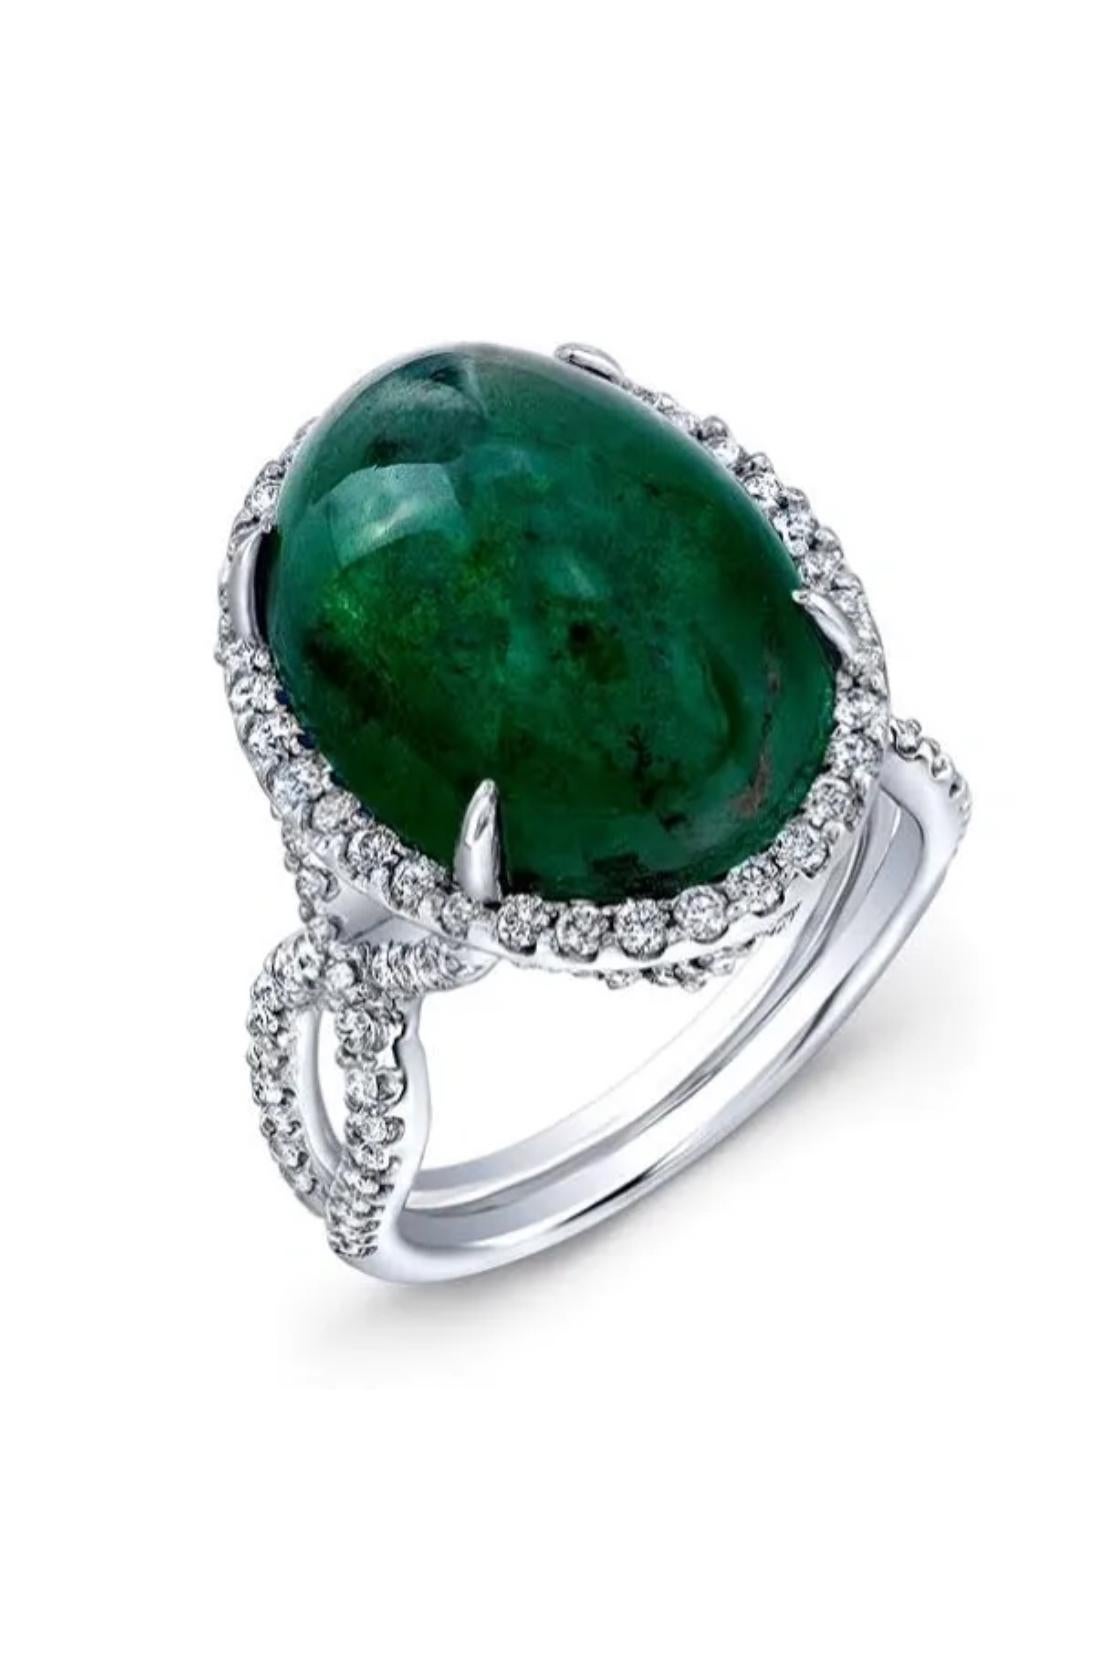 Cabochon 16.70-carat, cabochon Zambian Emerald Cocktail ring. For Sale